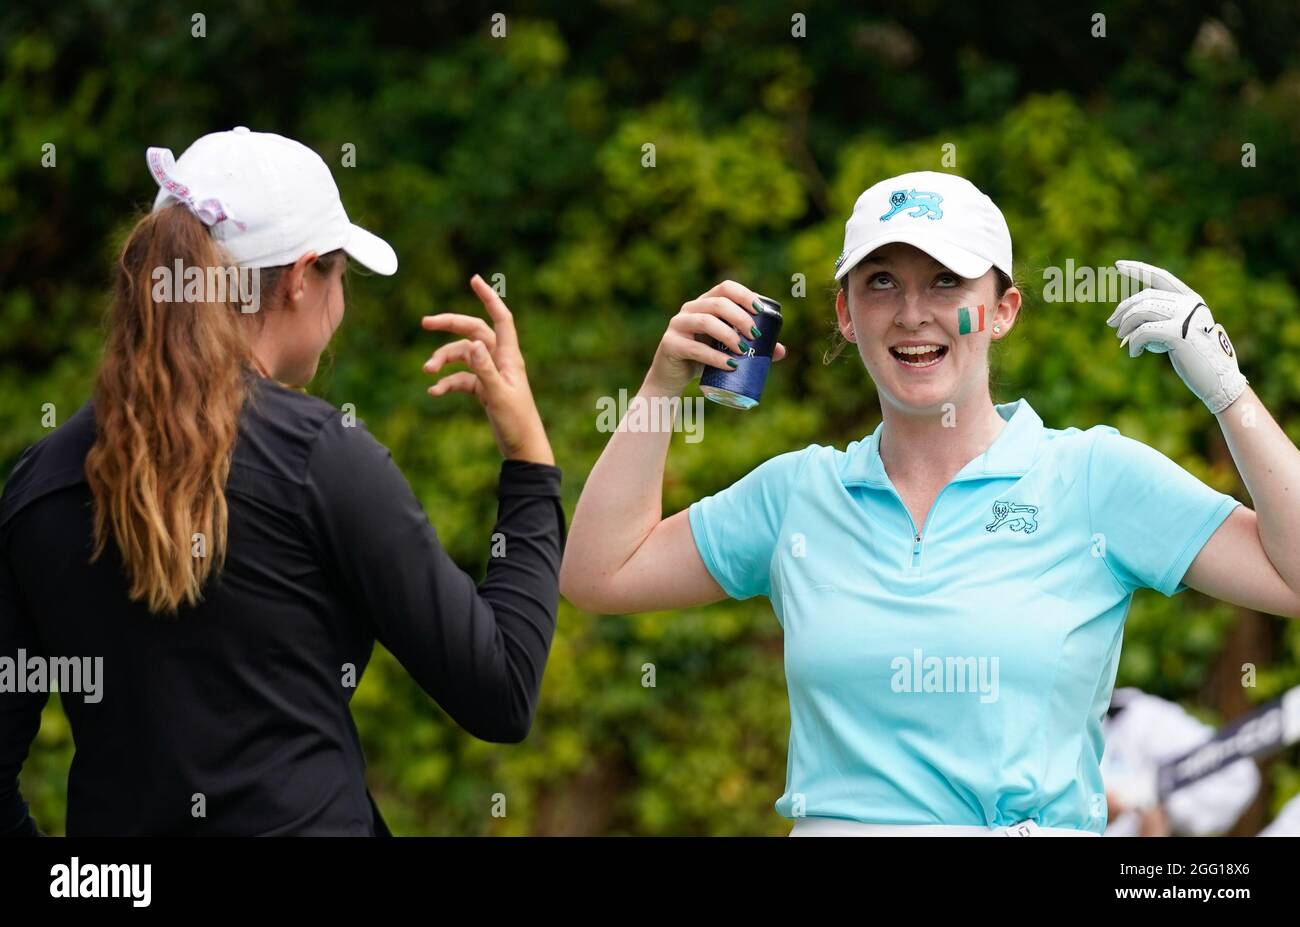 Team GB&I's Caley McGinty shares awoke with Lauren Walsh while they wait on the 7th tee during the 2021 Curtis Cup Day 1 - Afternoon Fourballs at Conw Stock Photo